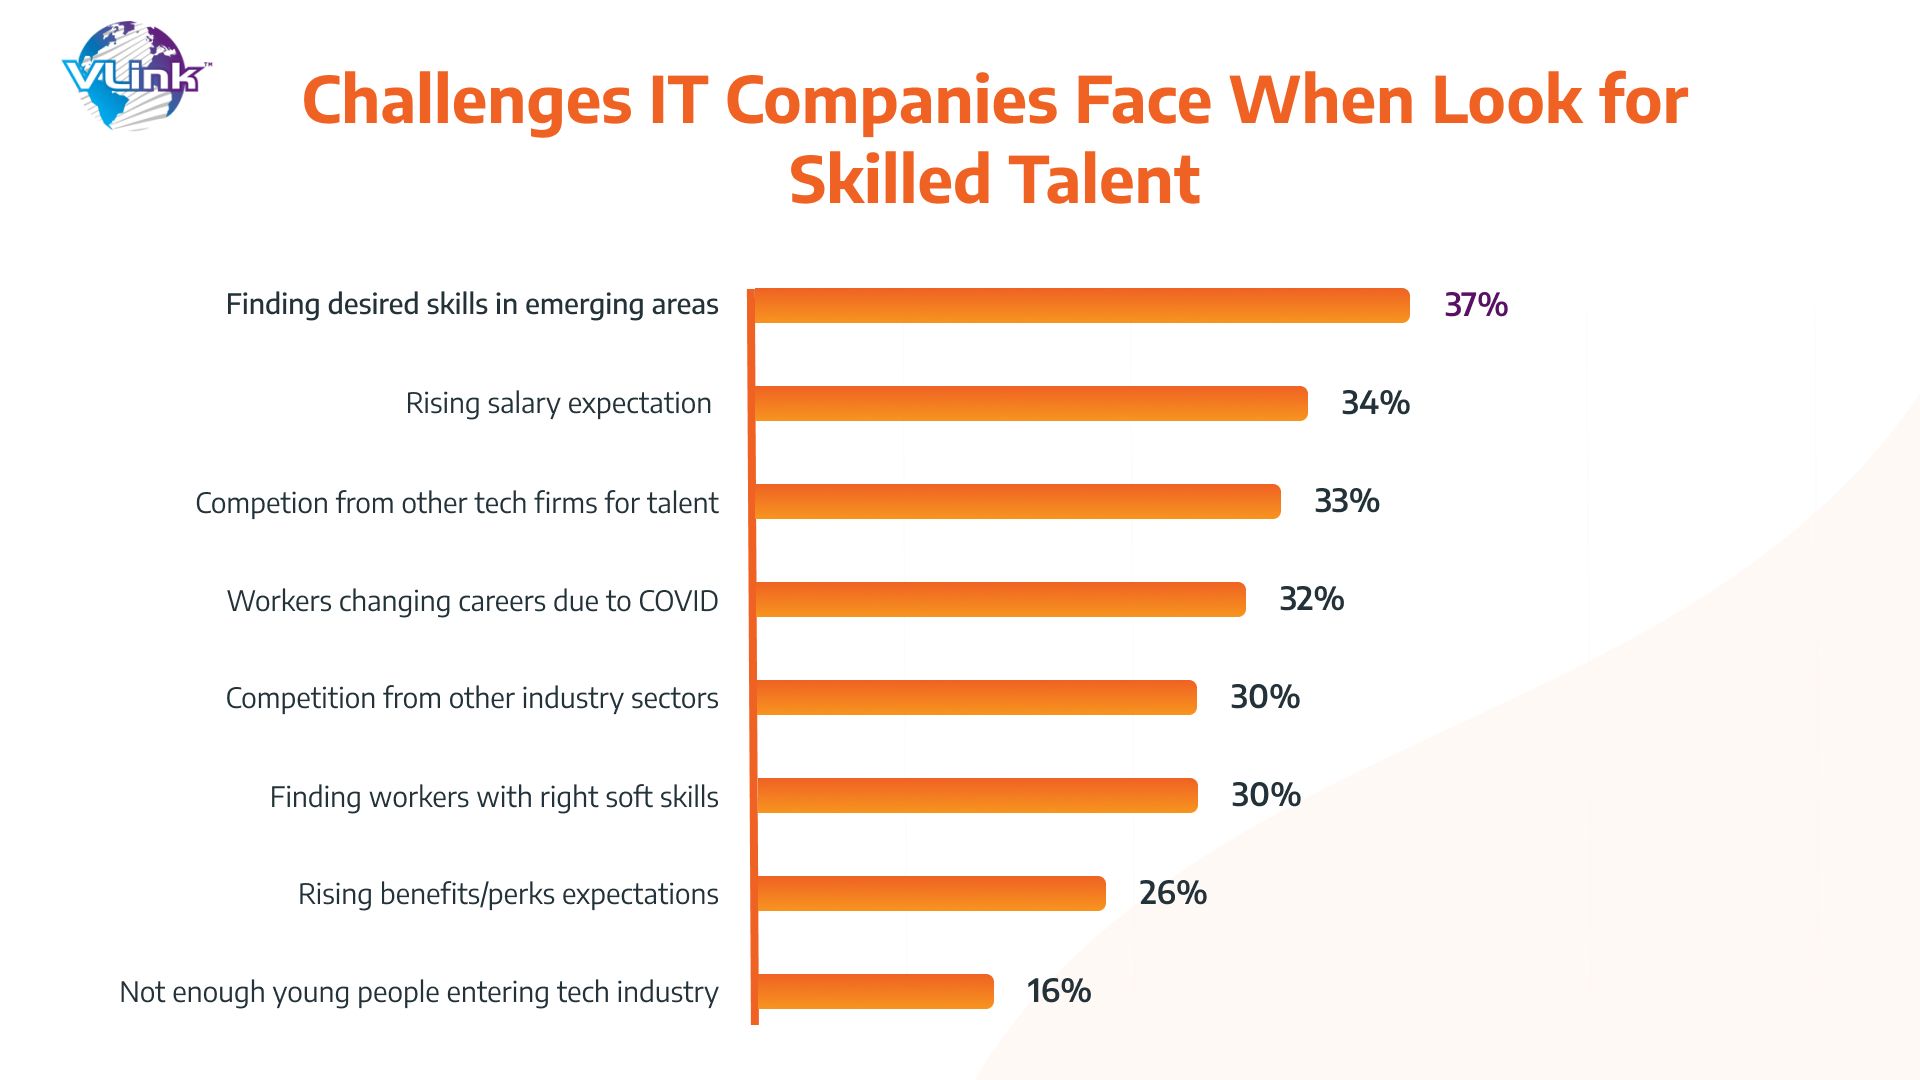 challenges IT companies face when looking for skilled talent